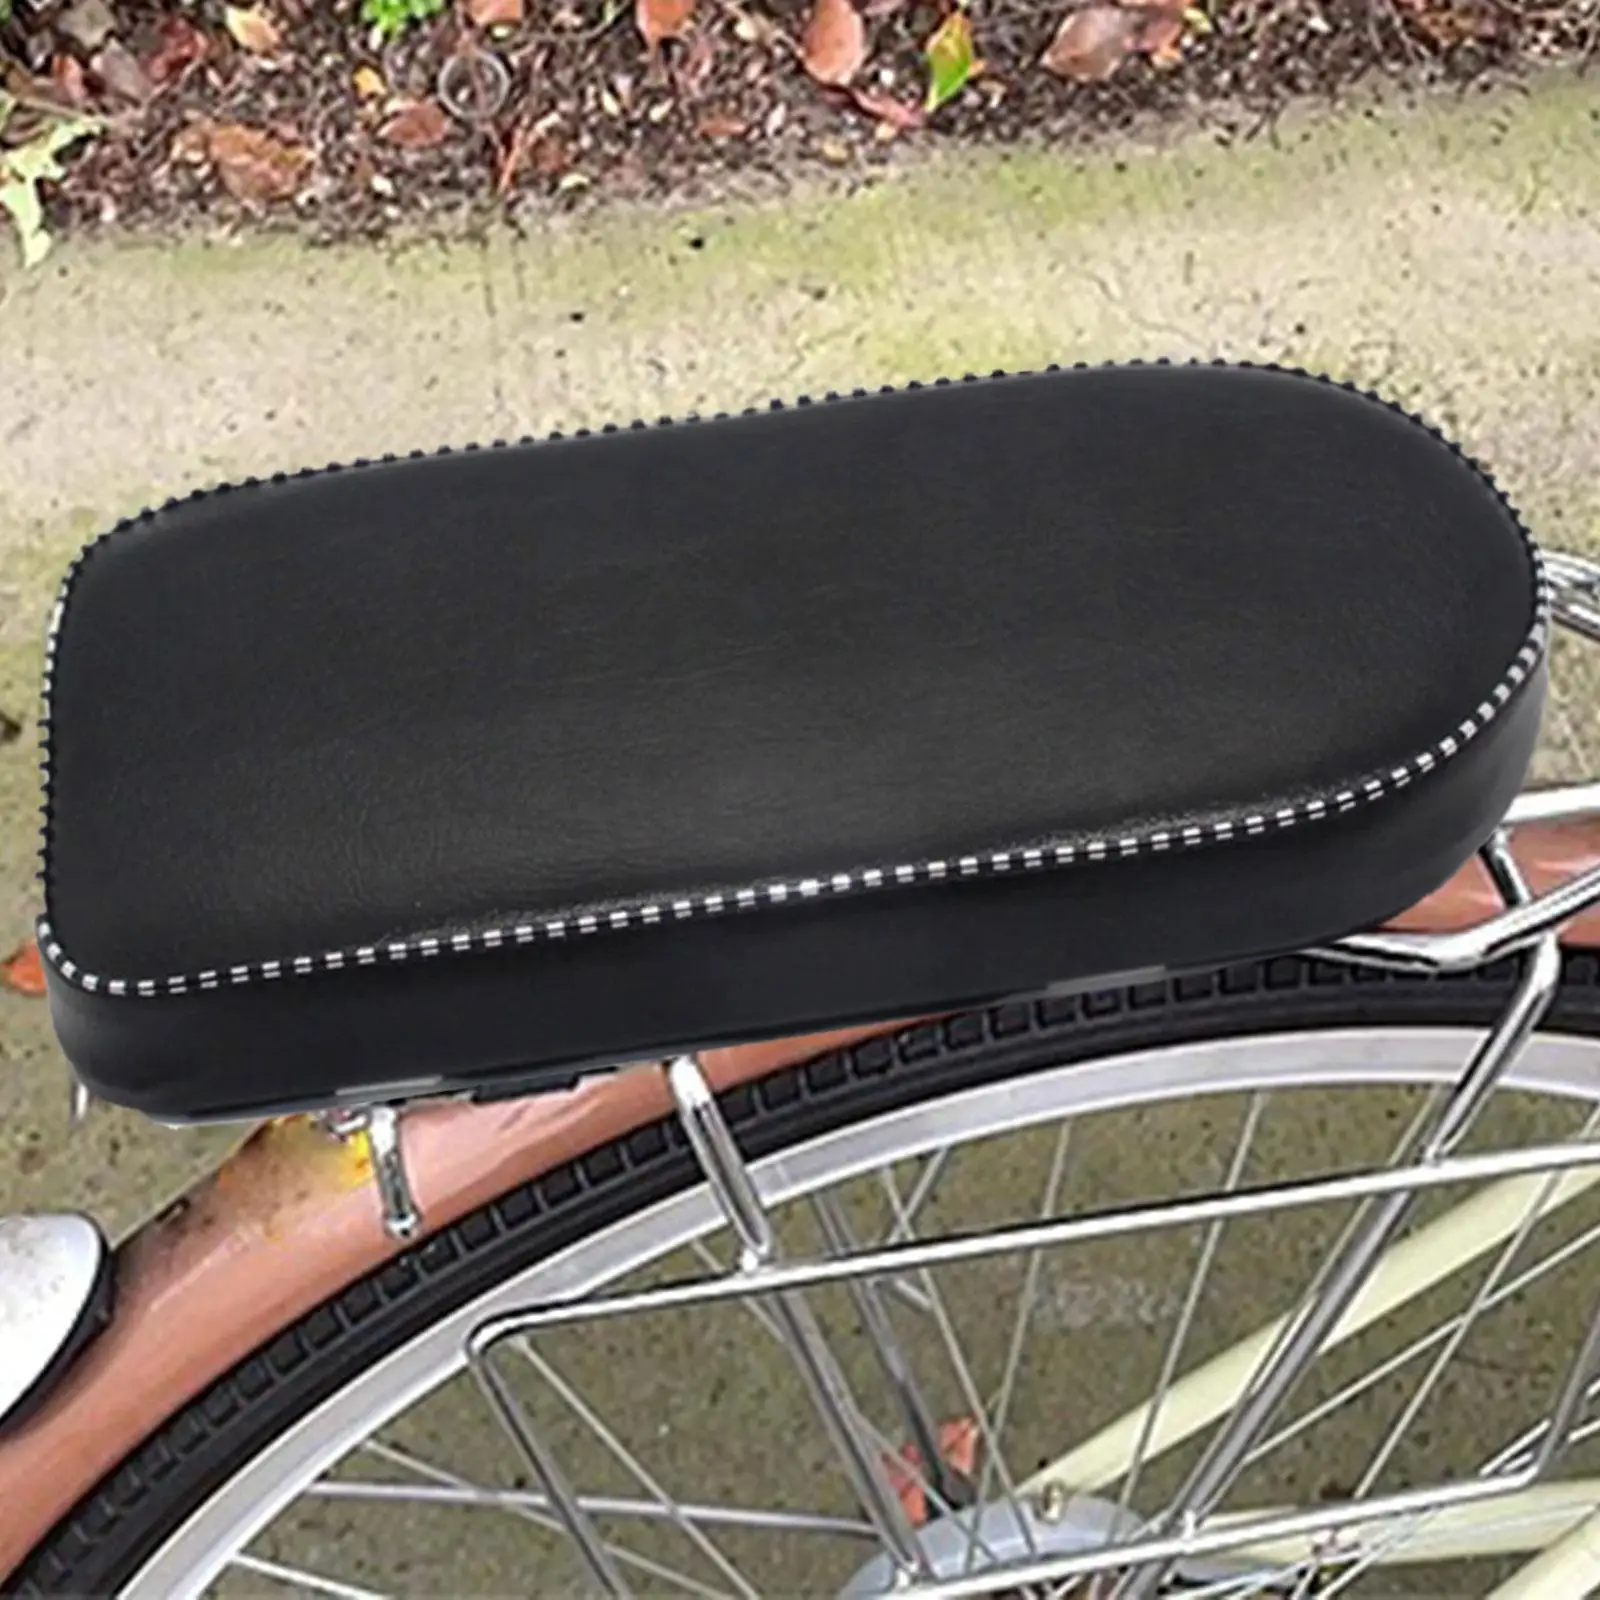 Multifunction Bike Back Seat Cushion Shockproof Waterproof Breathable Comfortable Bike Saddle for Riding Exercise Attachment